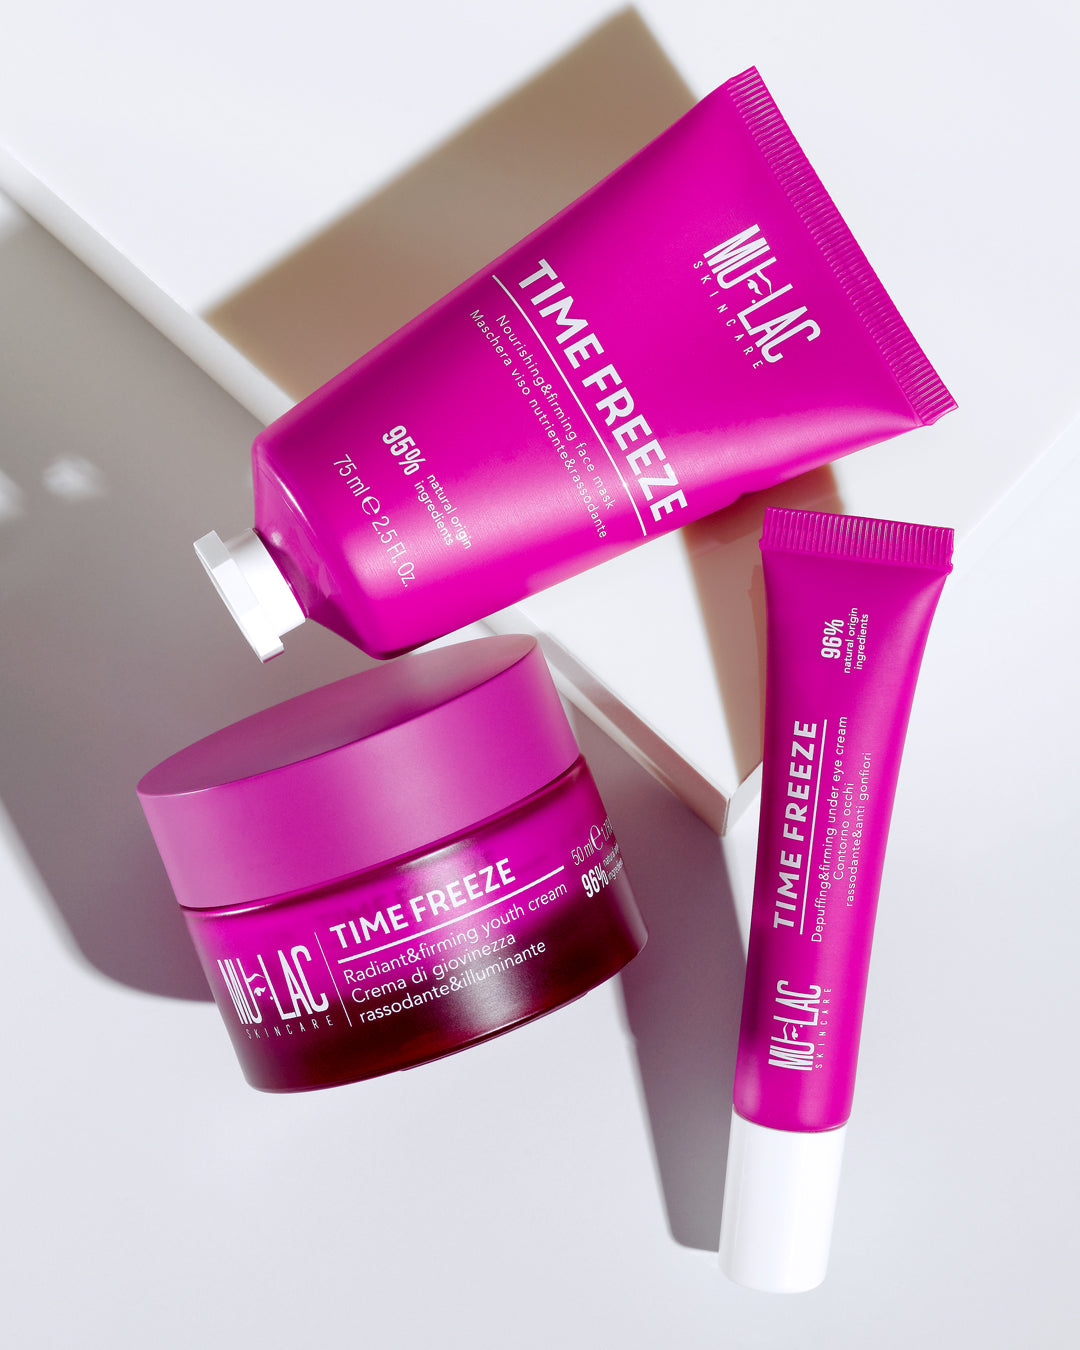 TIME FREEZE - NOURISHING AND FIRMING FACE MASK 